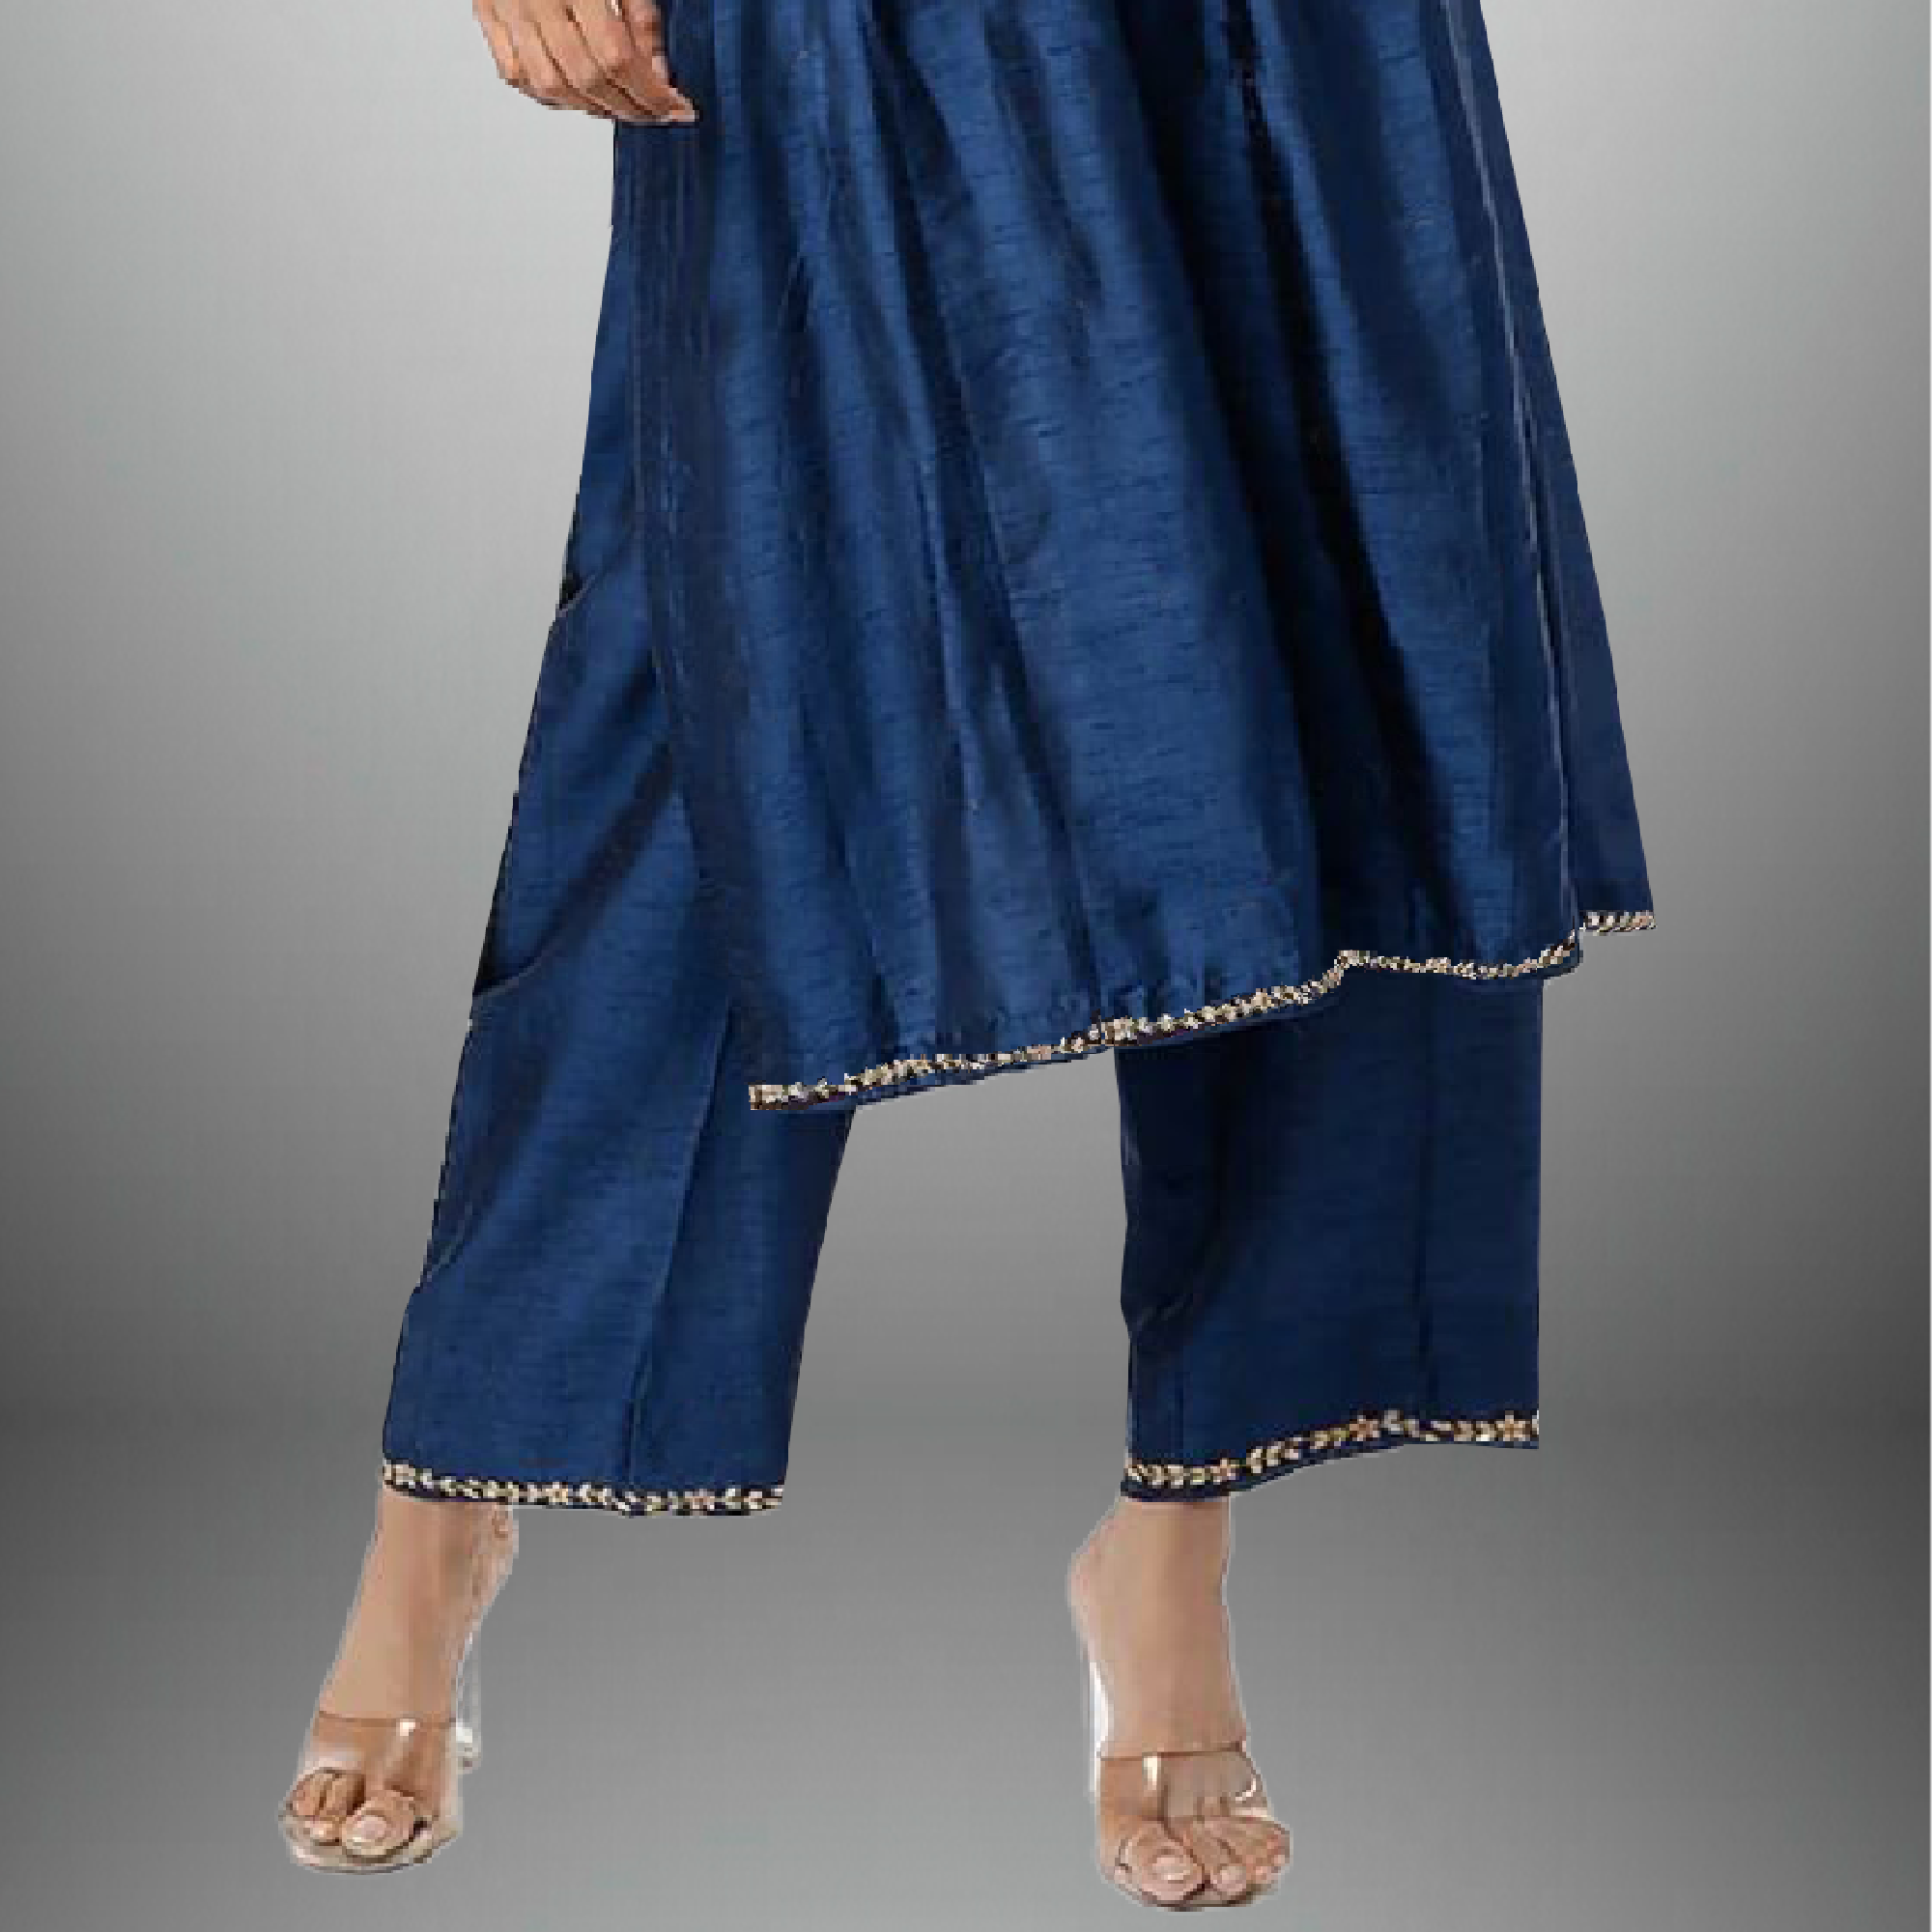 Women's Blue kurti with Golden embroidery and Golden lace border-RWKS038